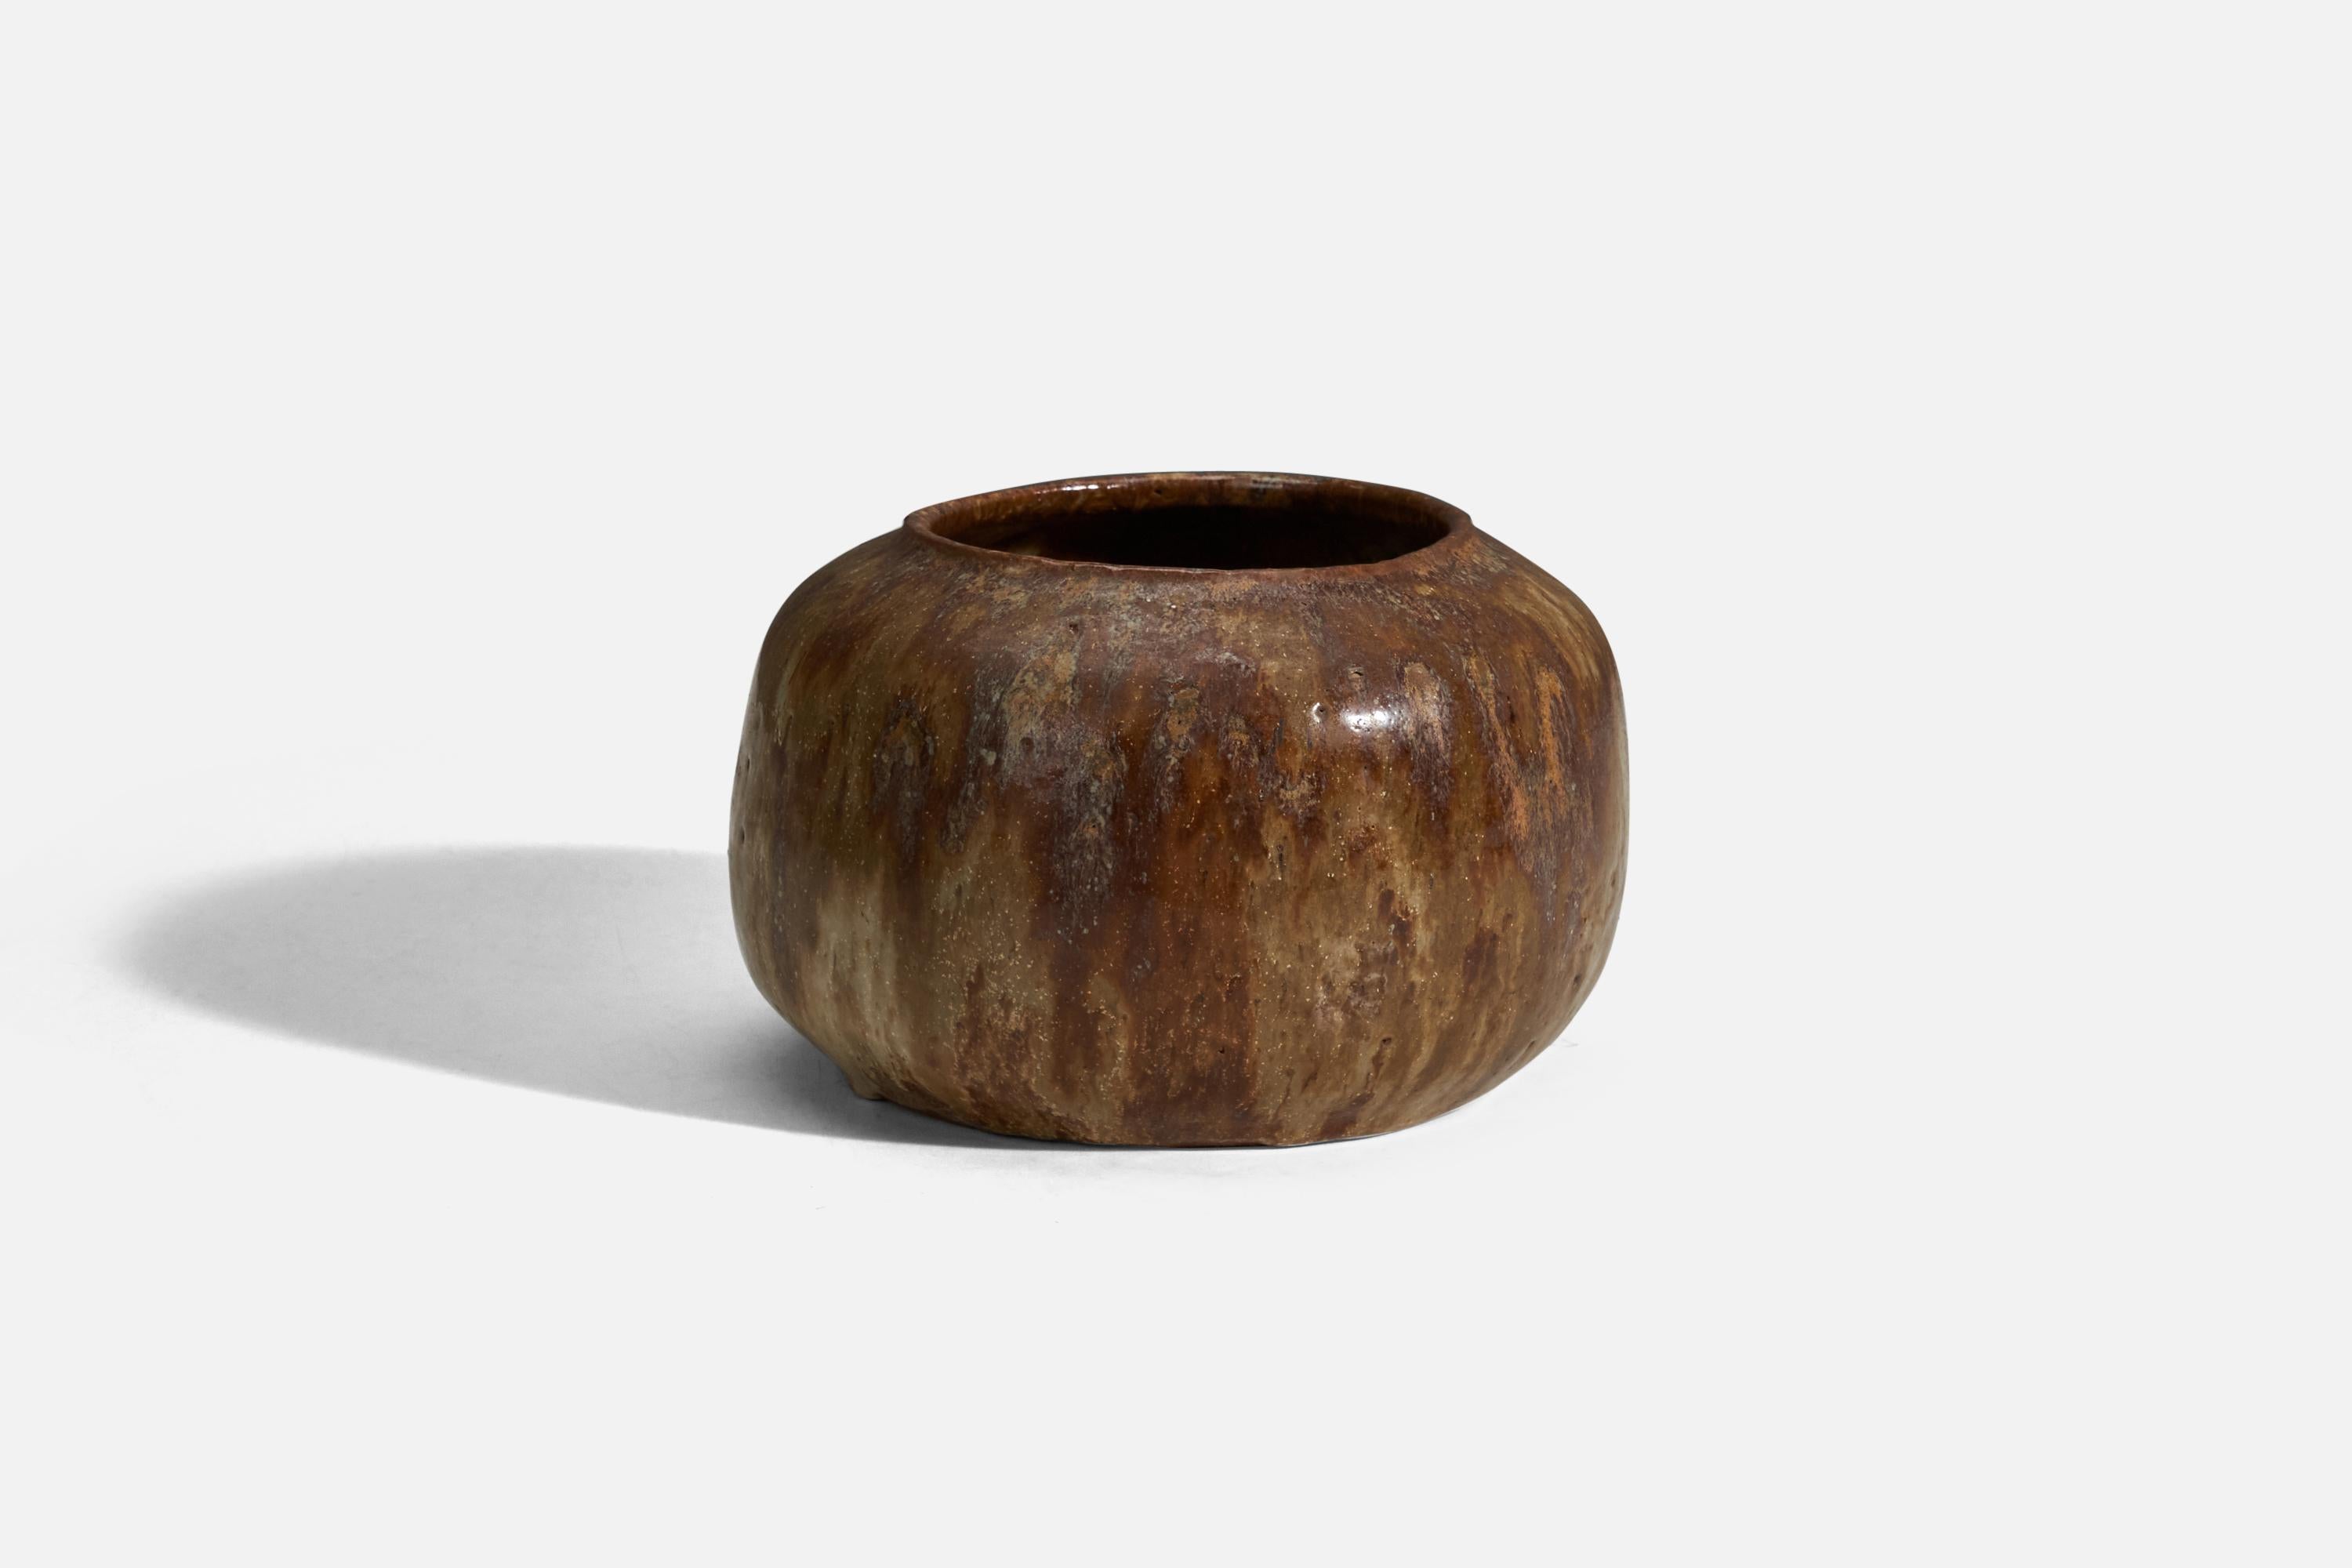 A brown glazed stoneware bowl designed and produced in Denmark, 1960s.